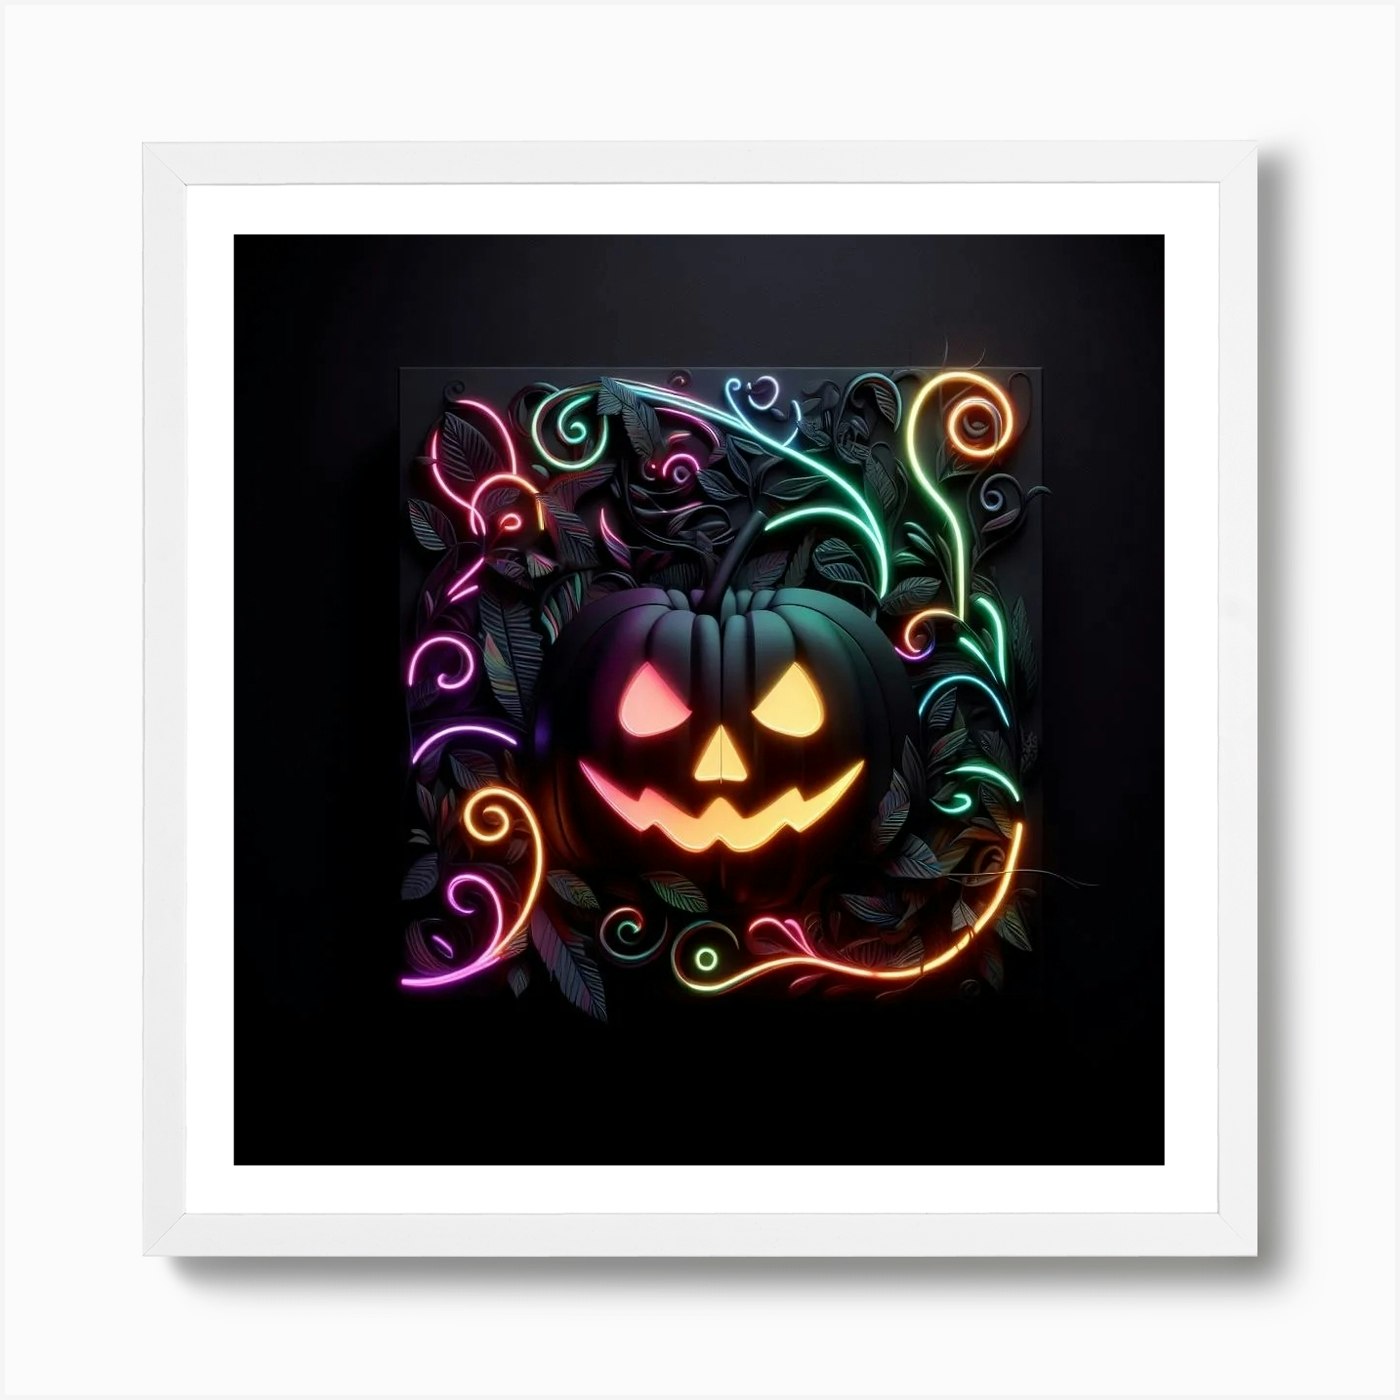 Fine Art & Collectibles :: Painting :: Space Pumpkins Original Oil Painting  - 16x20 inches on canvas board - abstract art, spooky, moon, dark, neon,  Halloween, goth, night, witchy